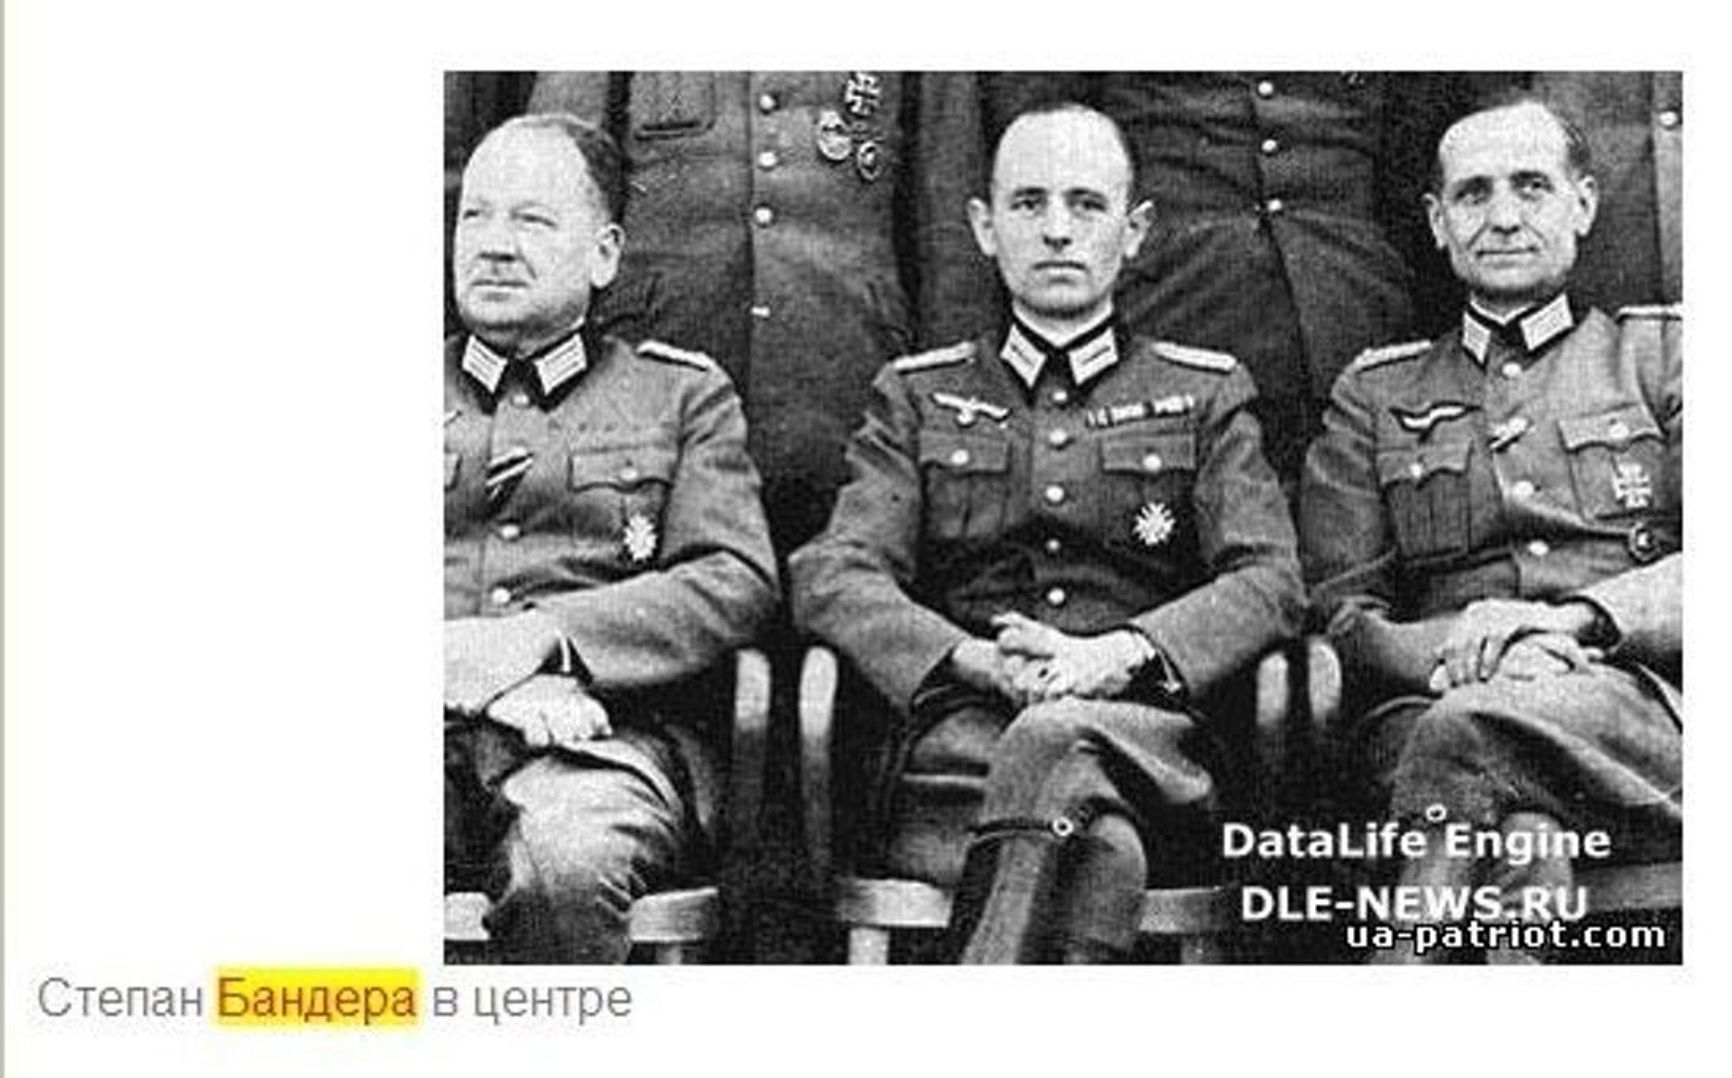 “Stepan Bandera in the middle”: a popular fake photo of Bandera (the man in the photo is Reinhard Gehlen)